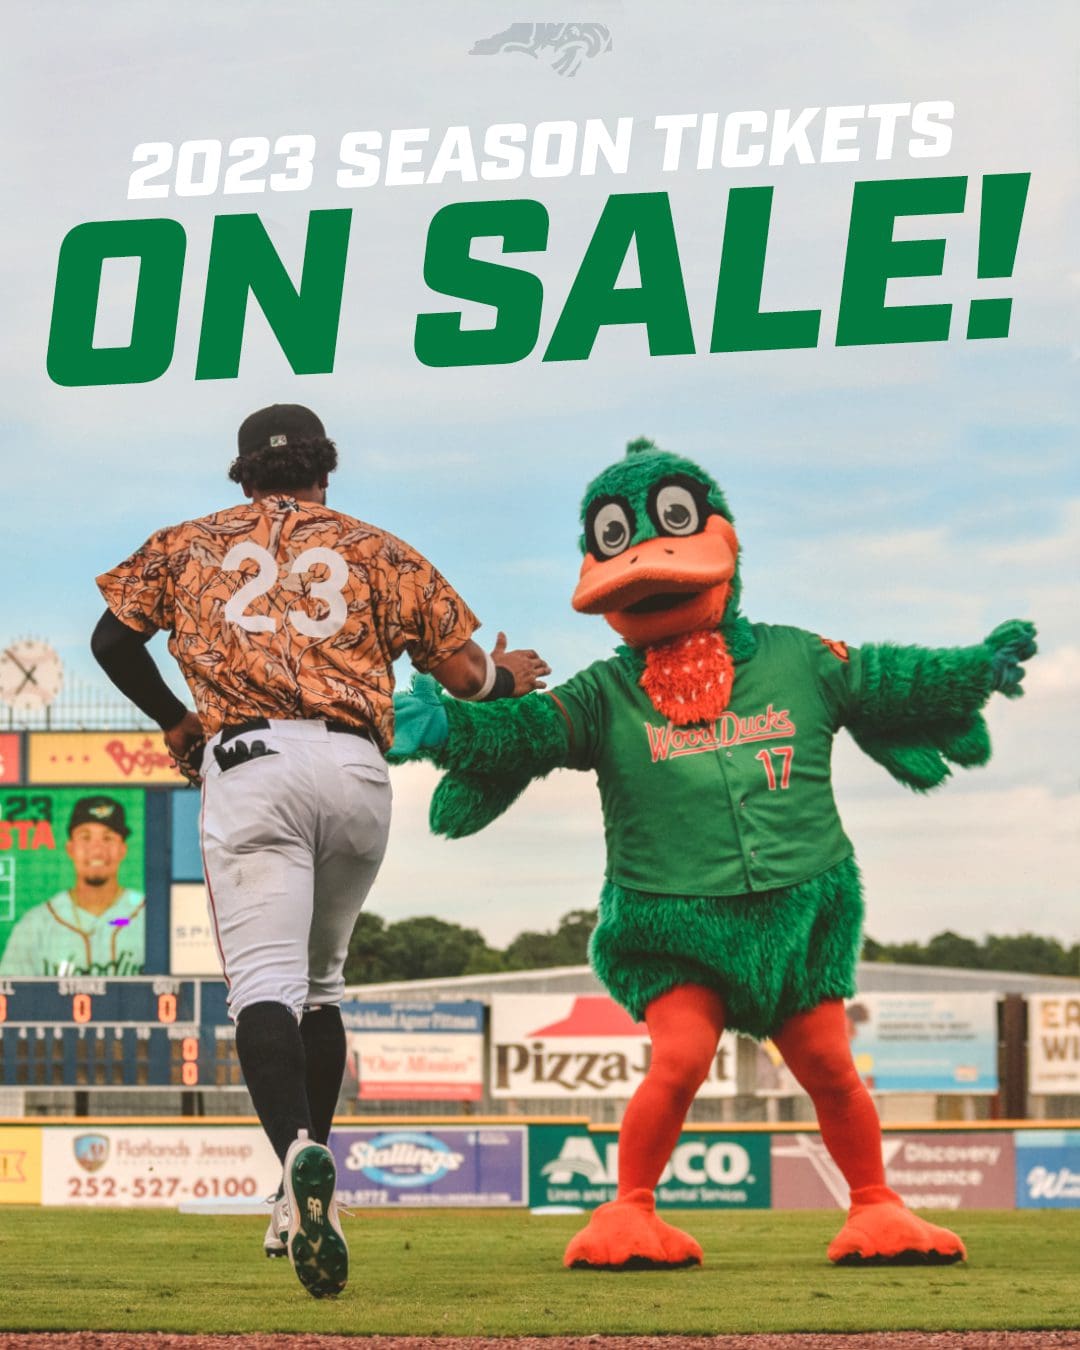 Concession Operations Coordinator | Down East Wood Ducks